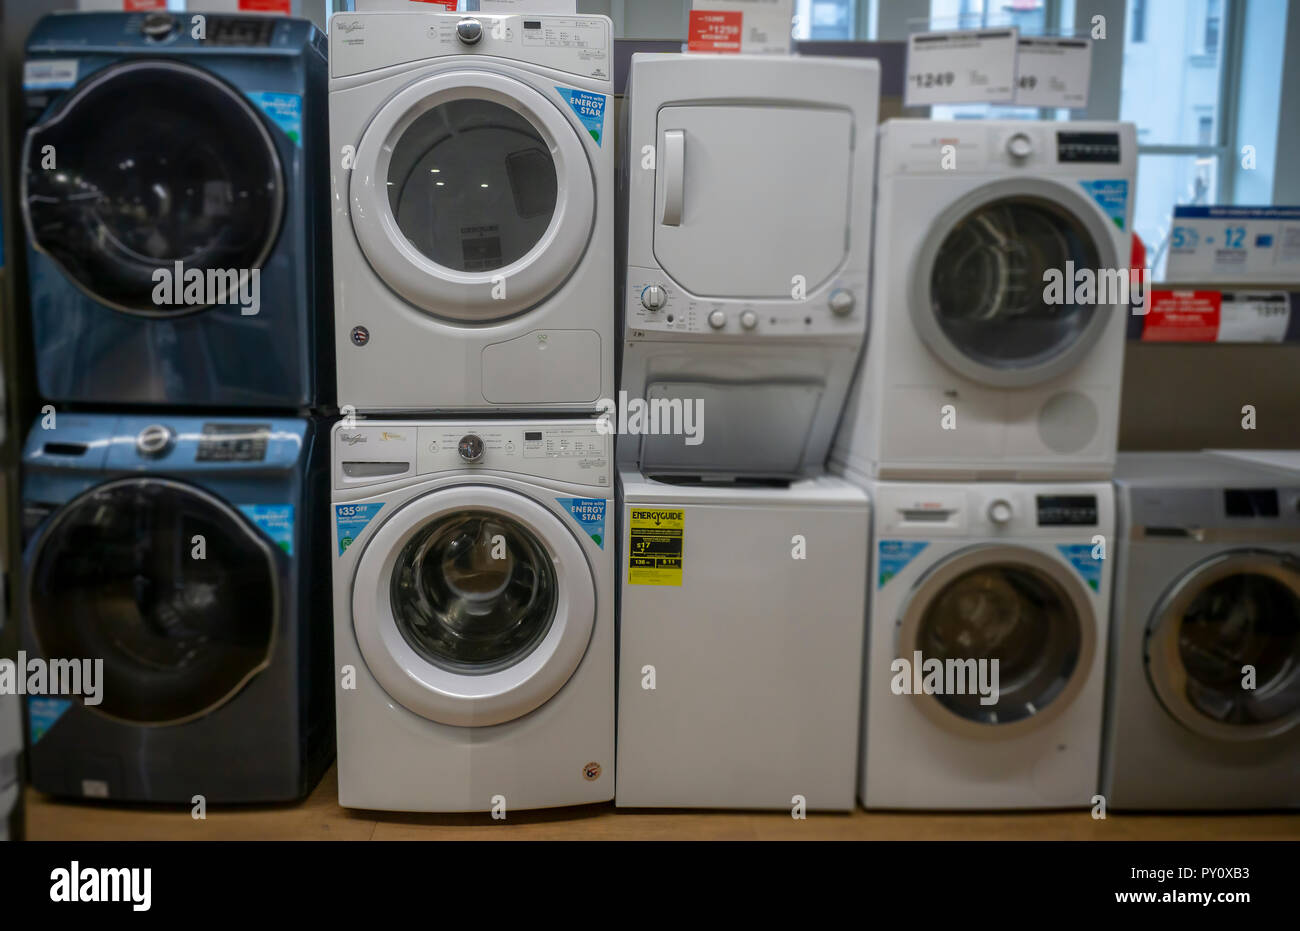 Whirlpool washing machines and dryers, second from left, amidst other brands in a hardware store in New York on Monday, October 22, 2018. (© Richard B. Levine) Stock Photo